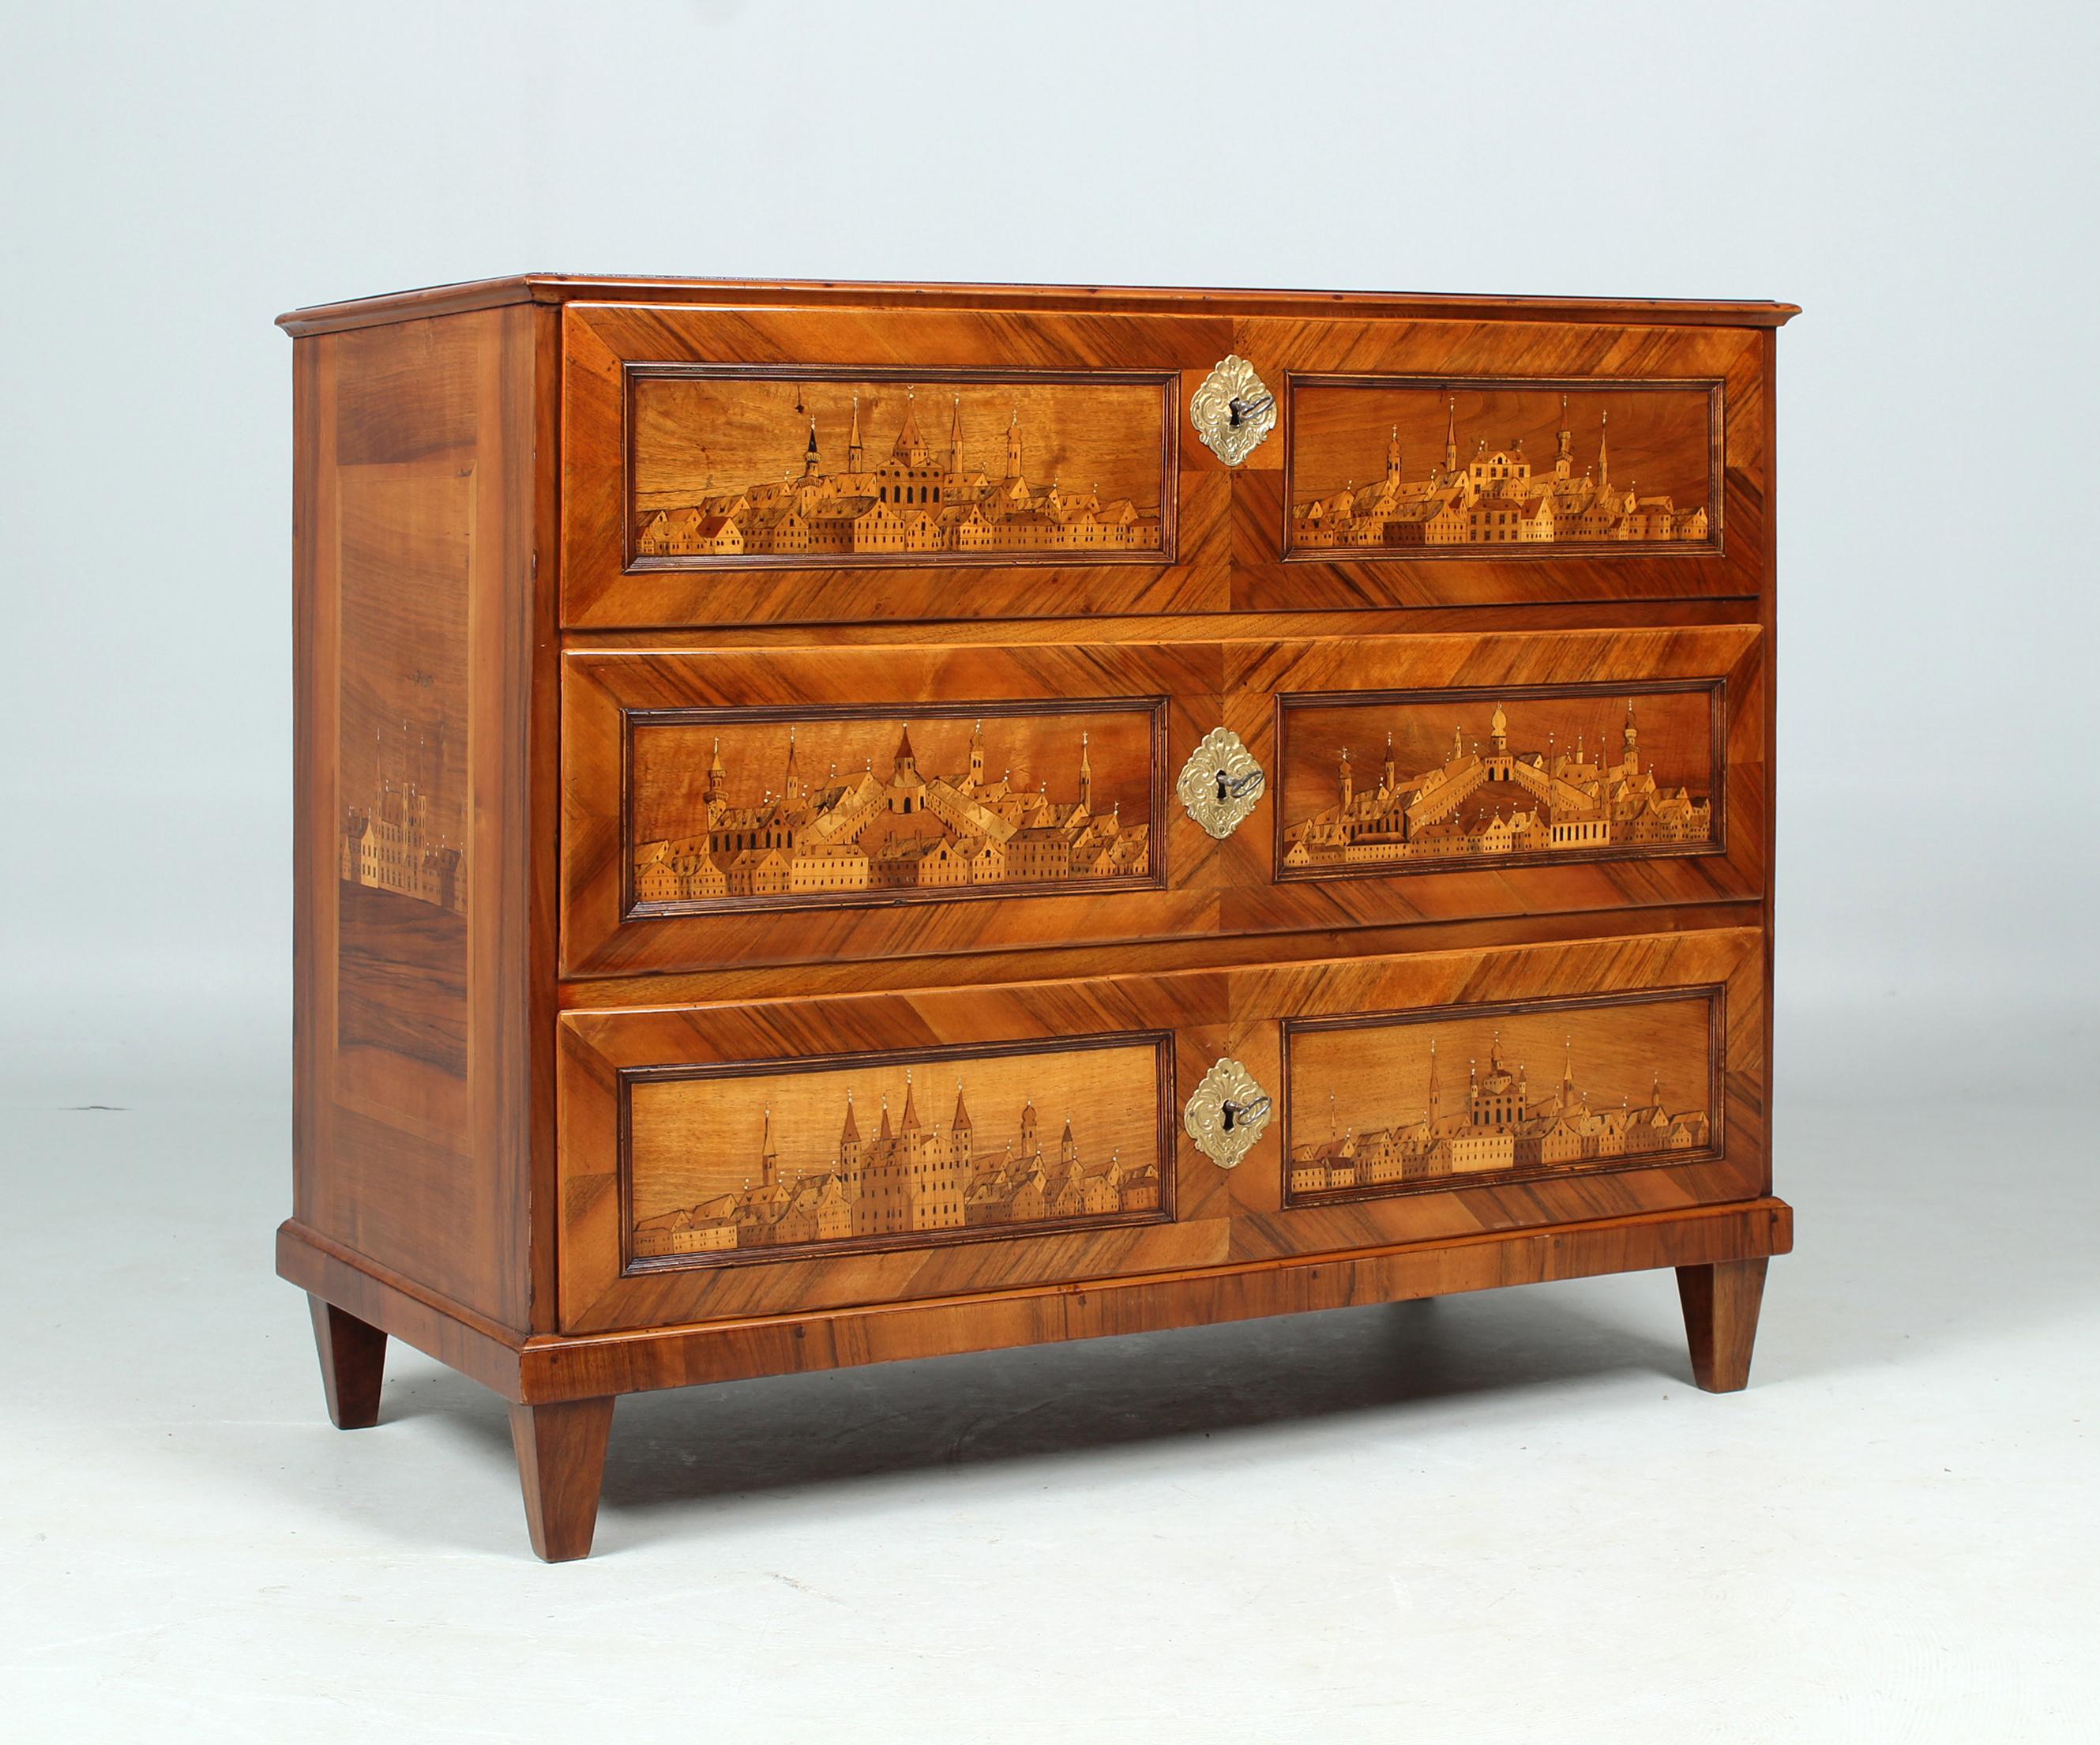 Early 19th Century Italian Louis XVI Chest of Drawers with Fantastic Marquetry For Sale 8